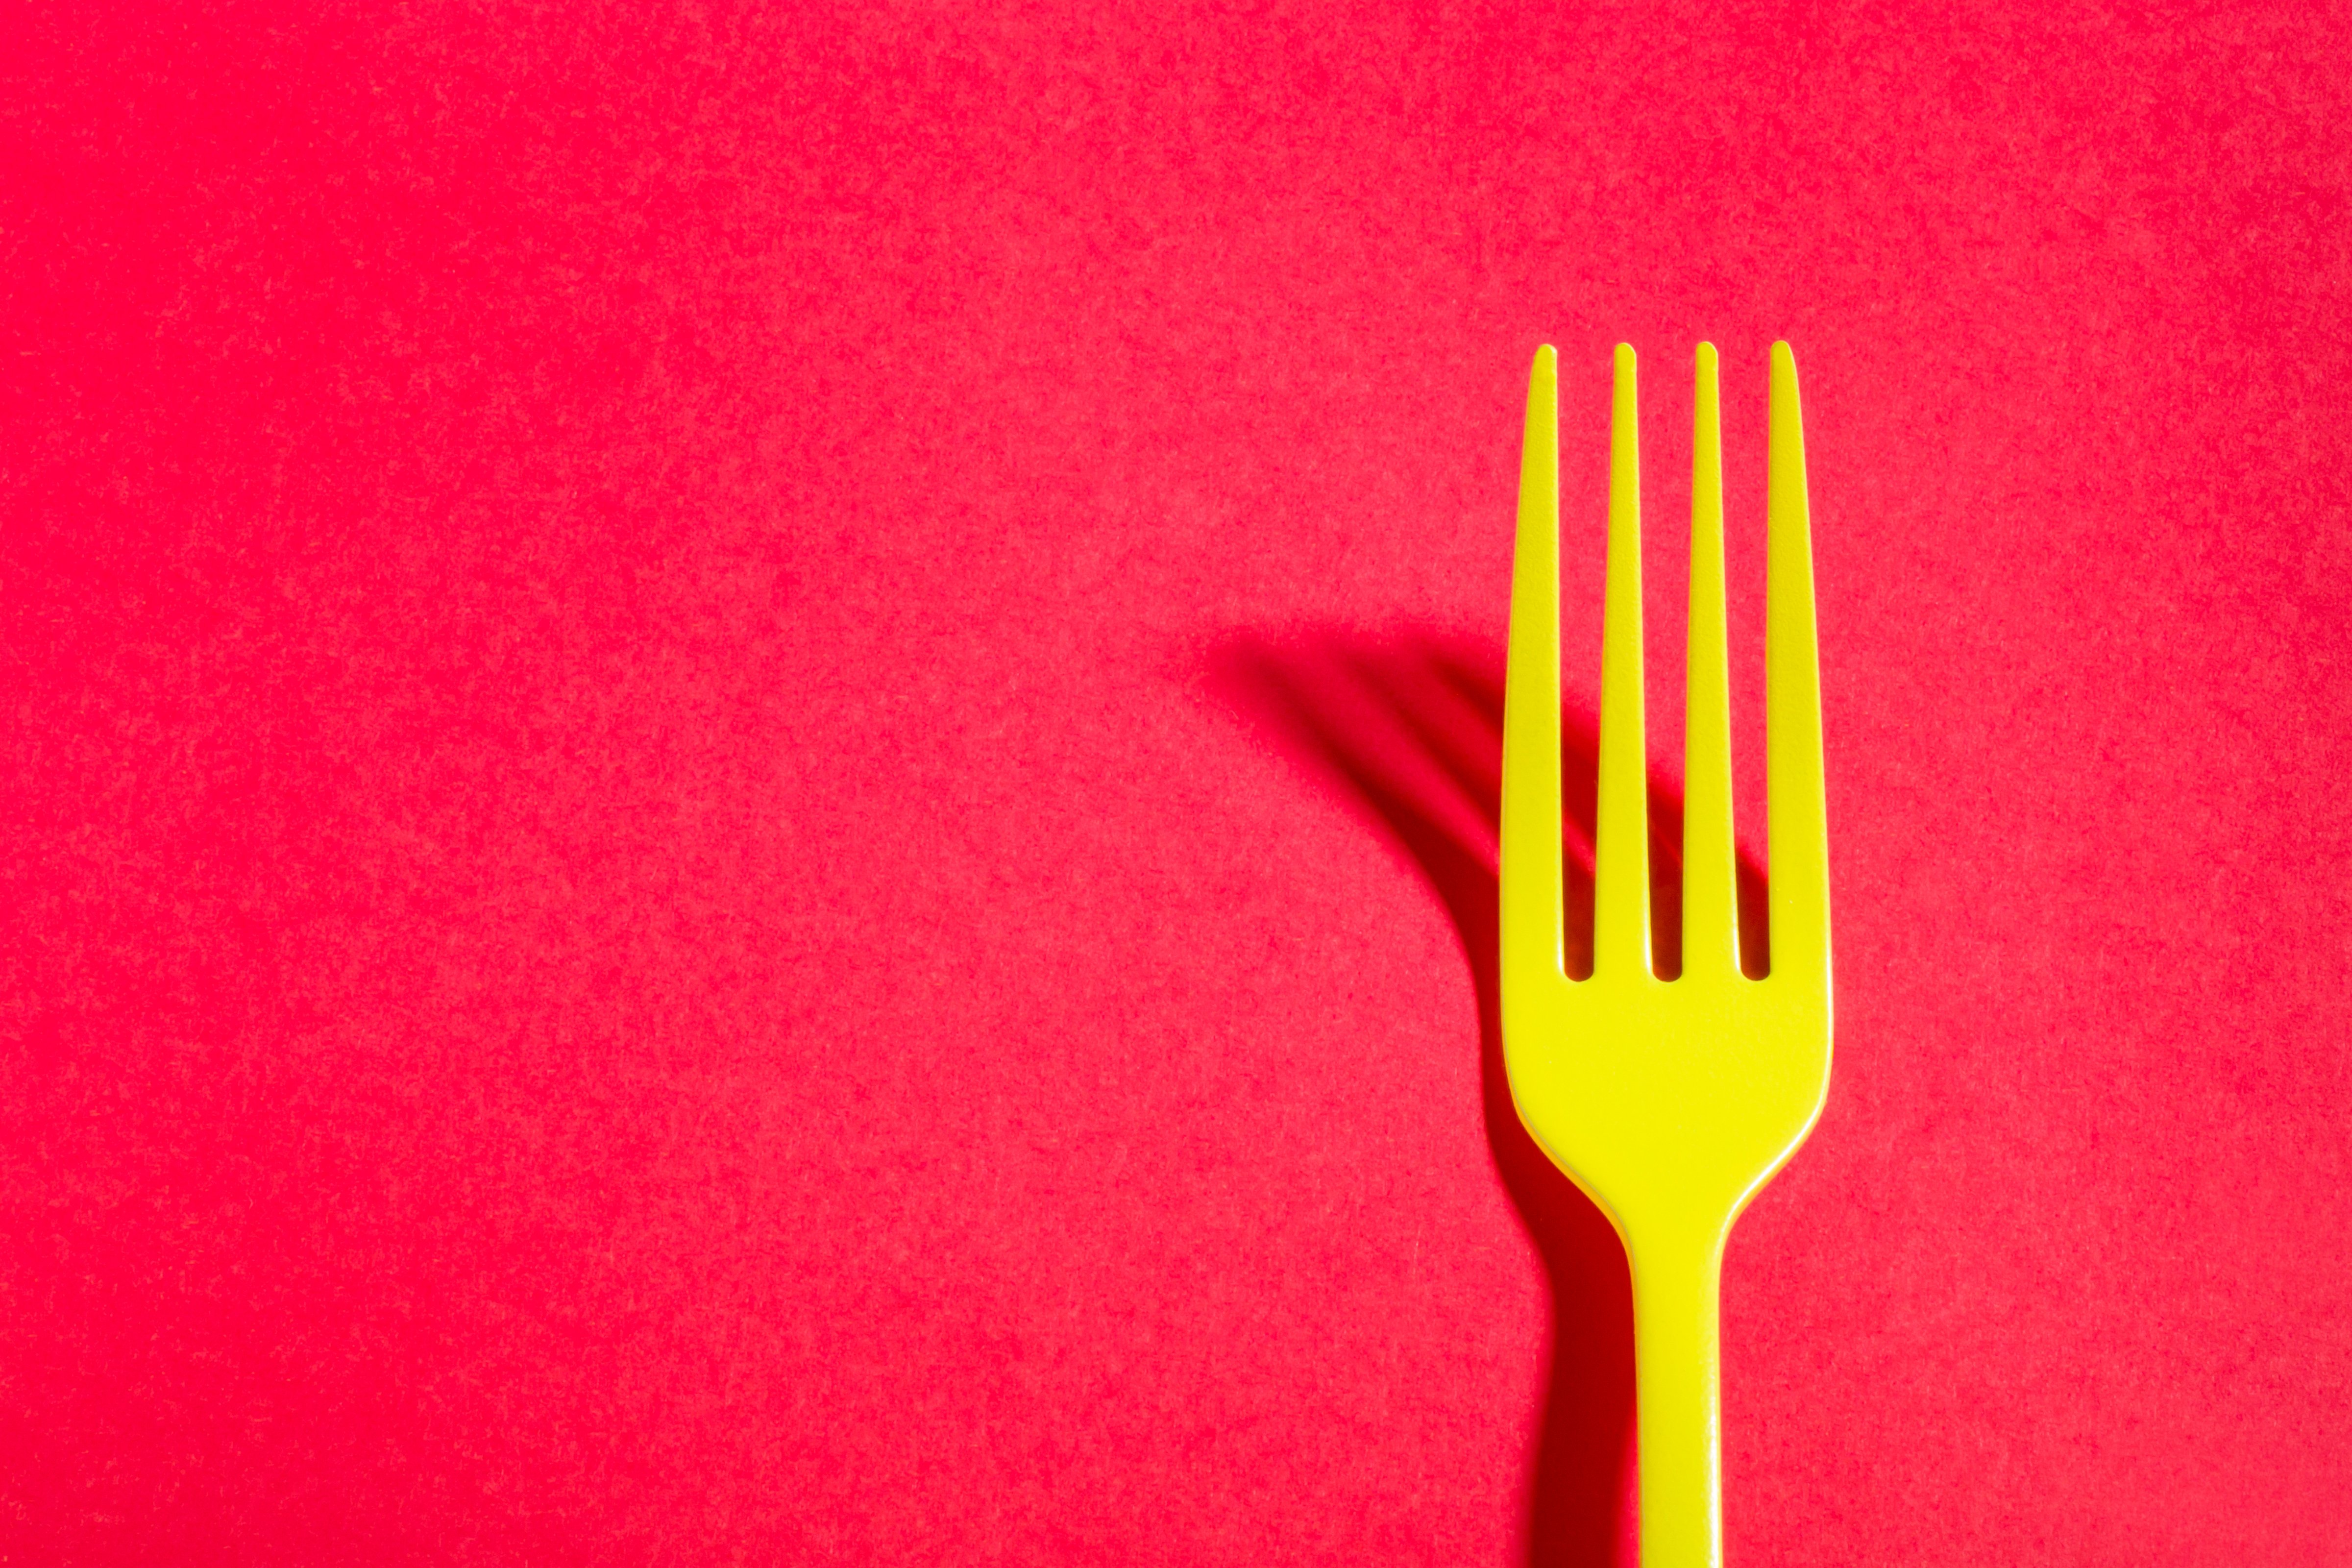 Clos-Up Of Yellow Fork Against Red Background